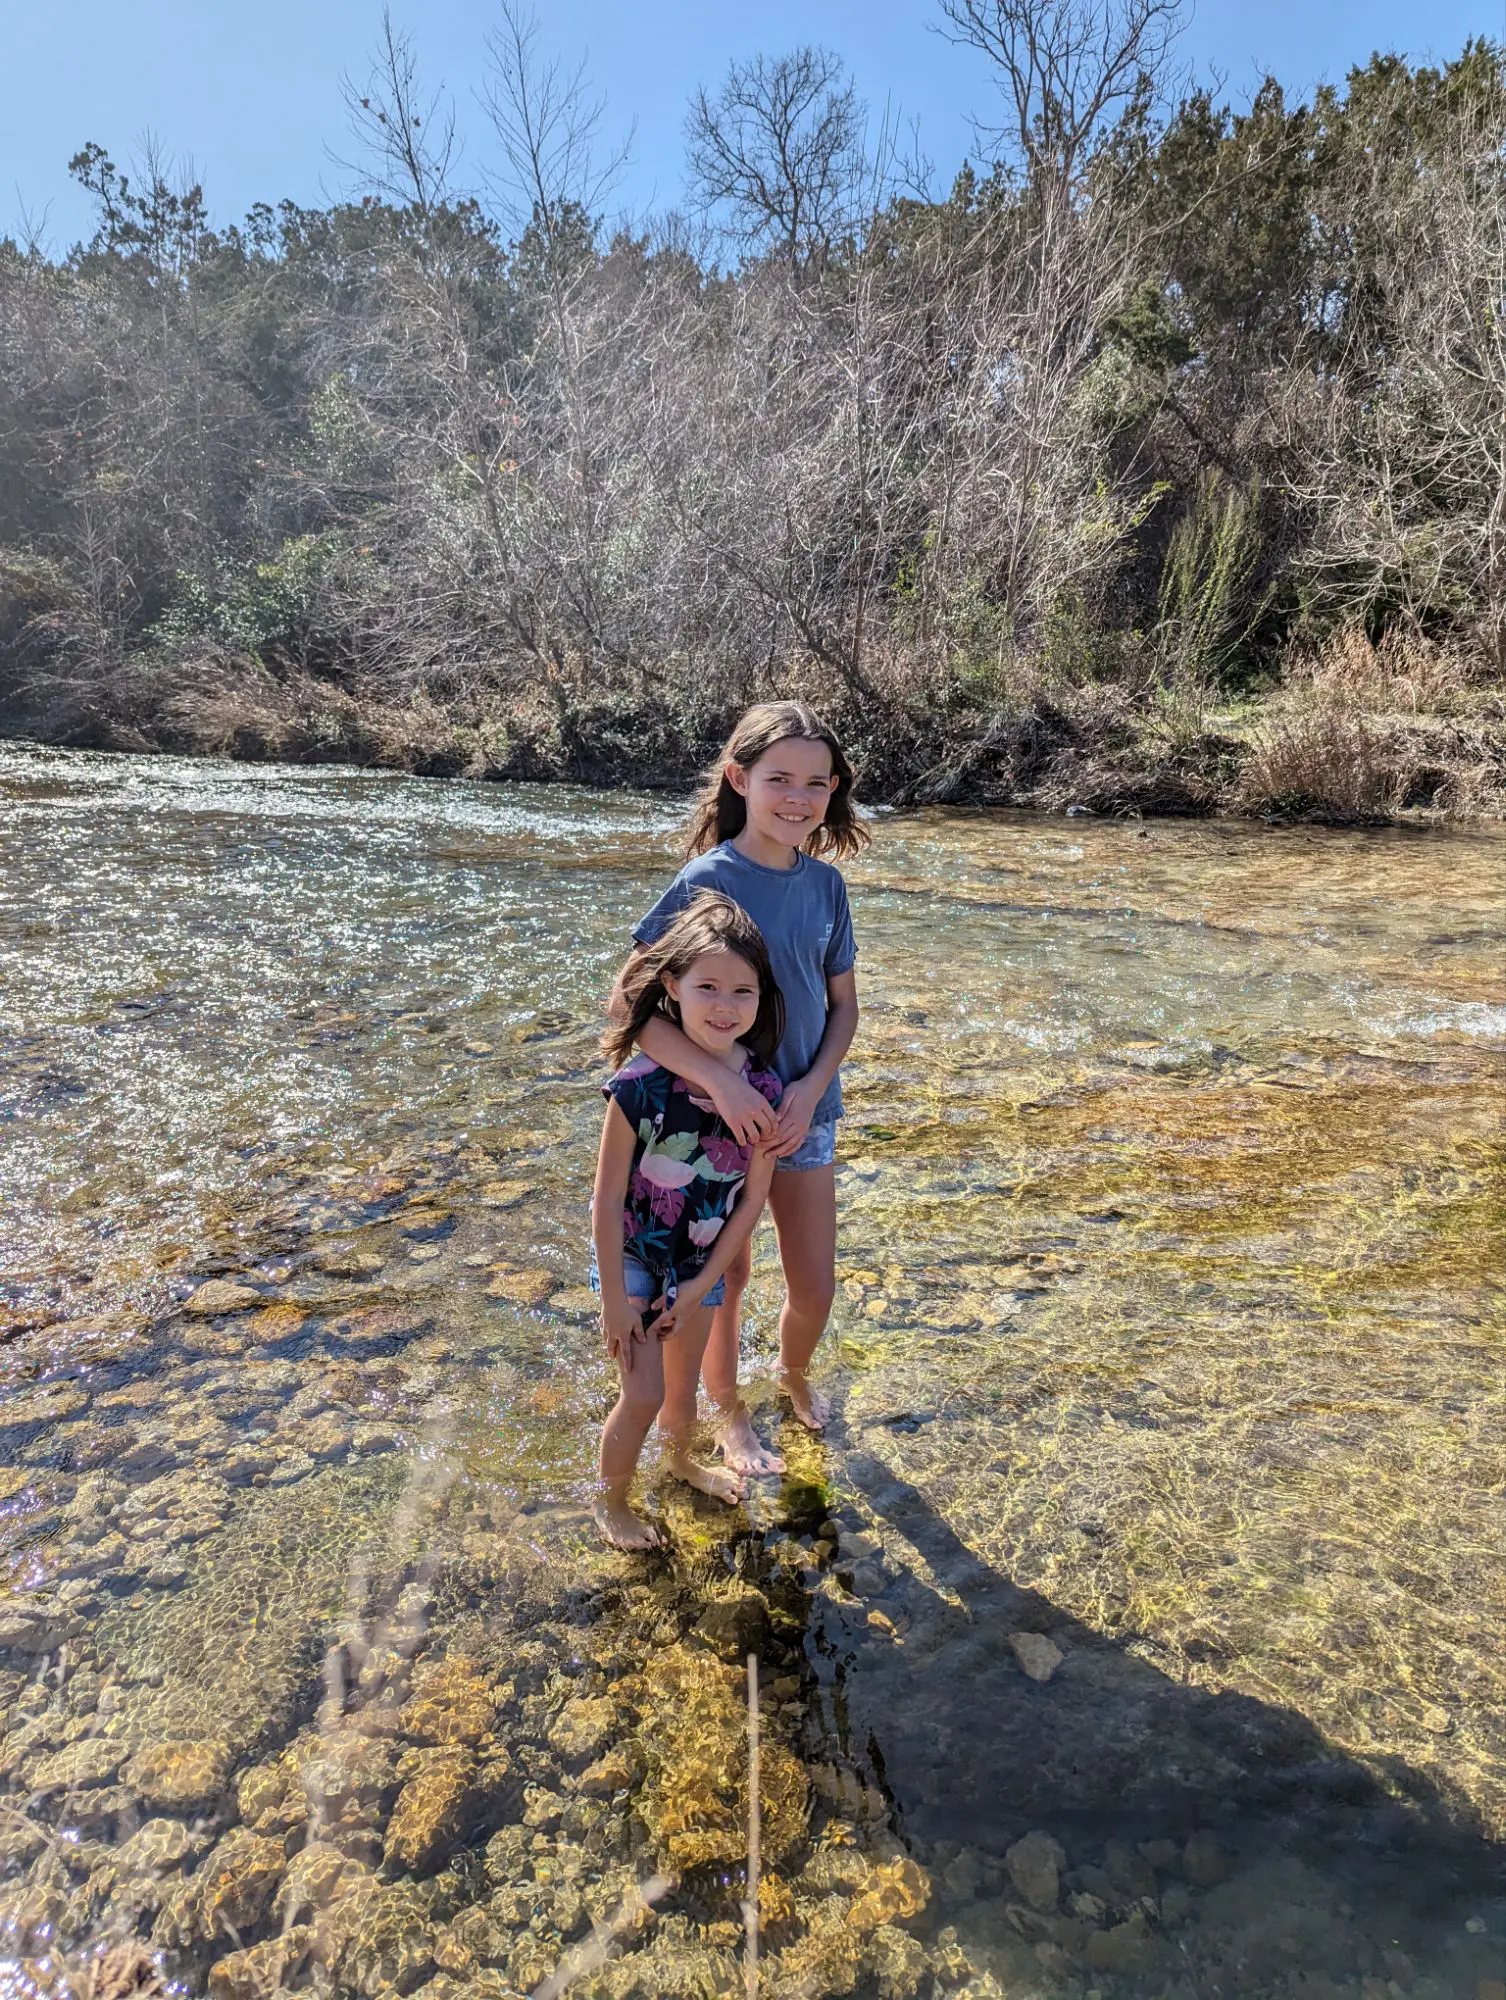 Zara with her arm around Addie as they stand in the river.